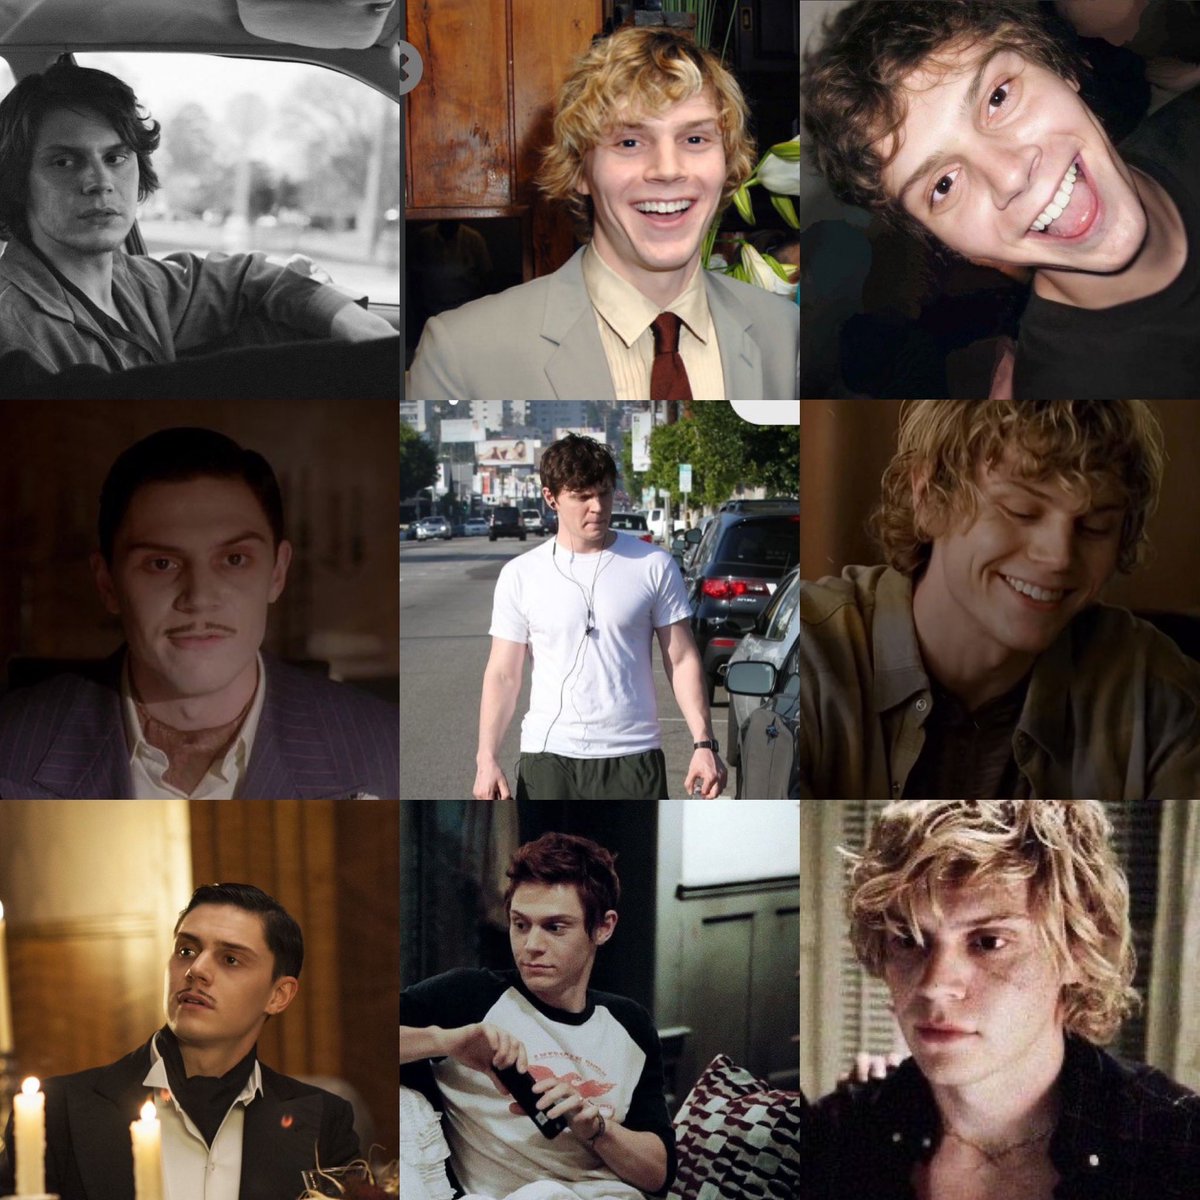 Evan Peters (pictures from the TL)